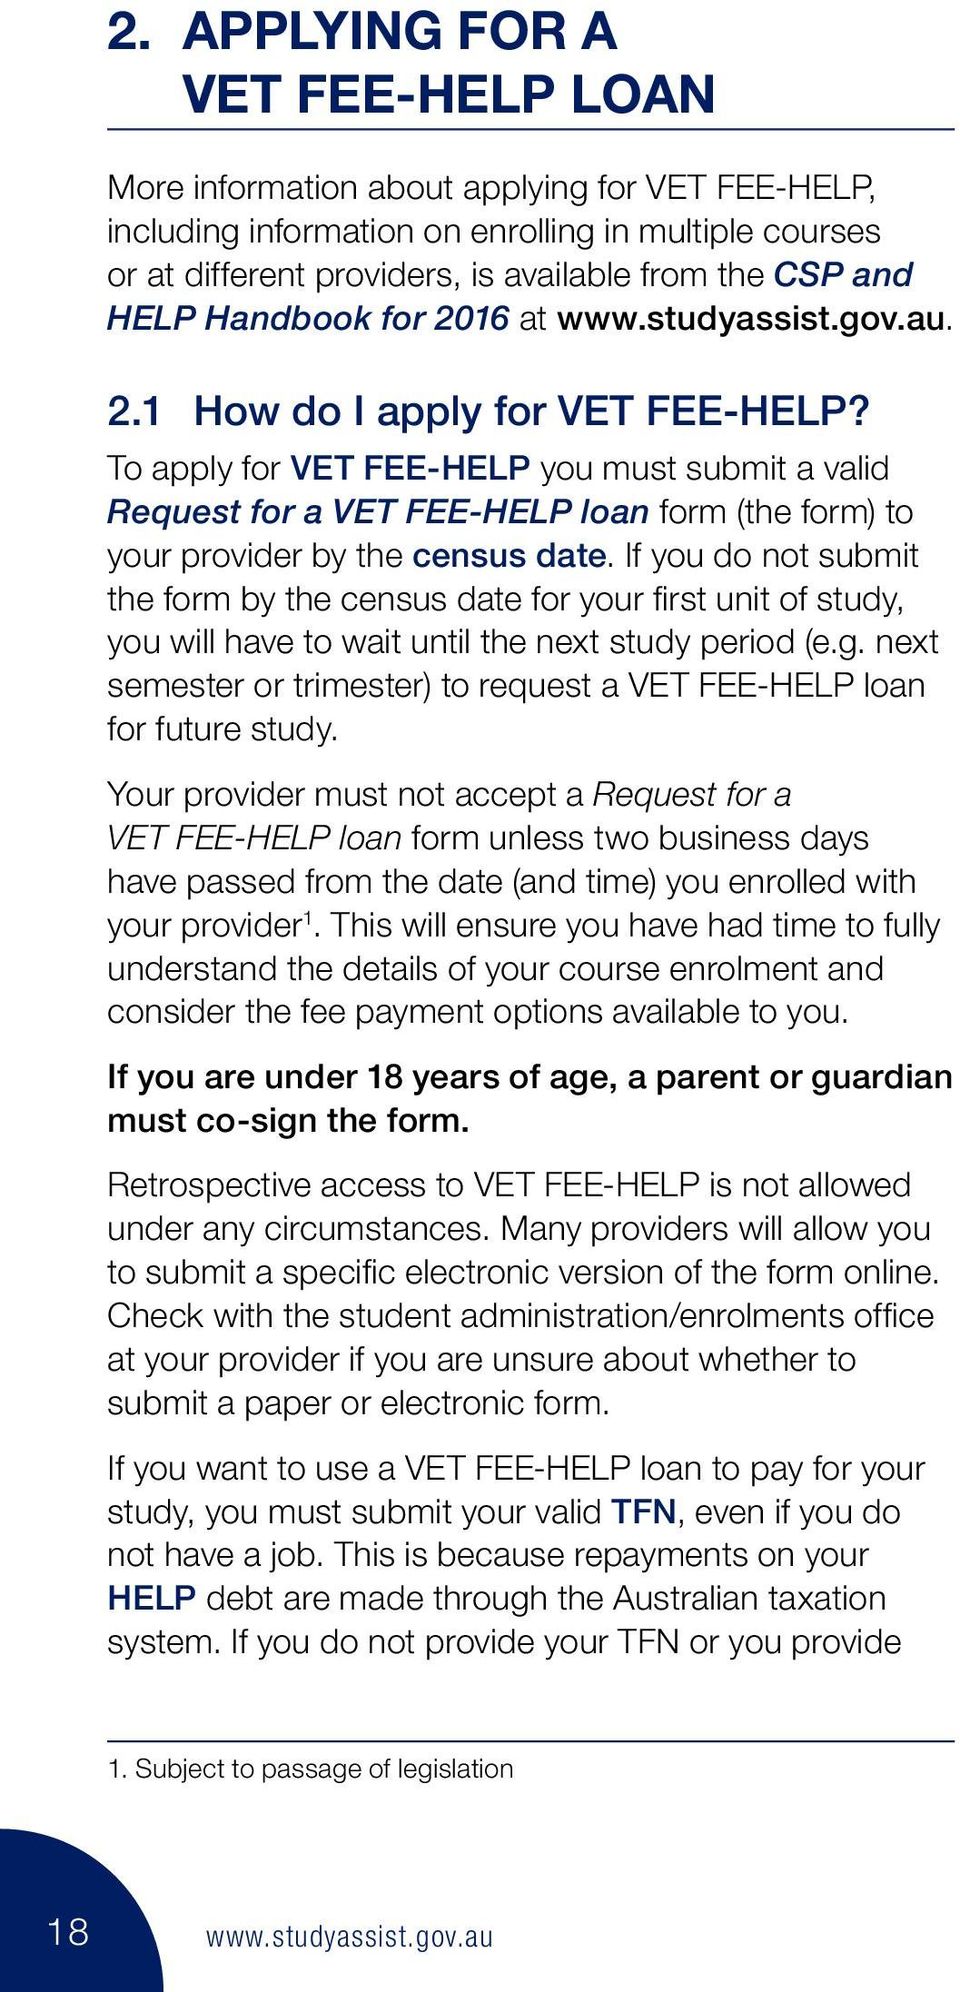 To apply for VET FEE-HELP you must submit a valid Request for a VET FEE-HELP loan form (the form) to your provider by the census date.